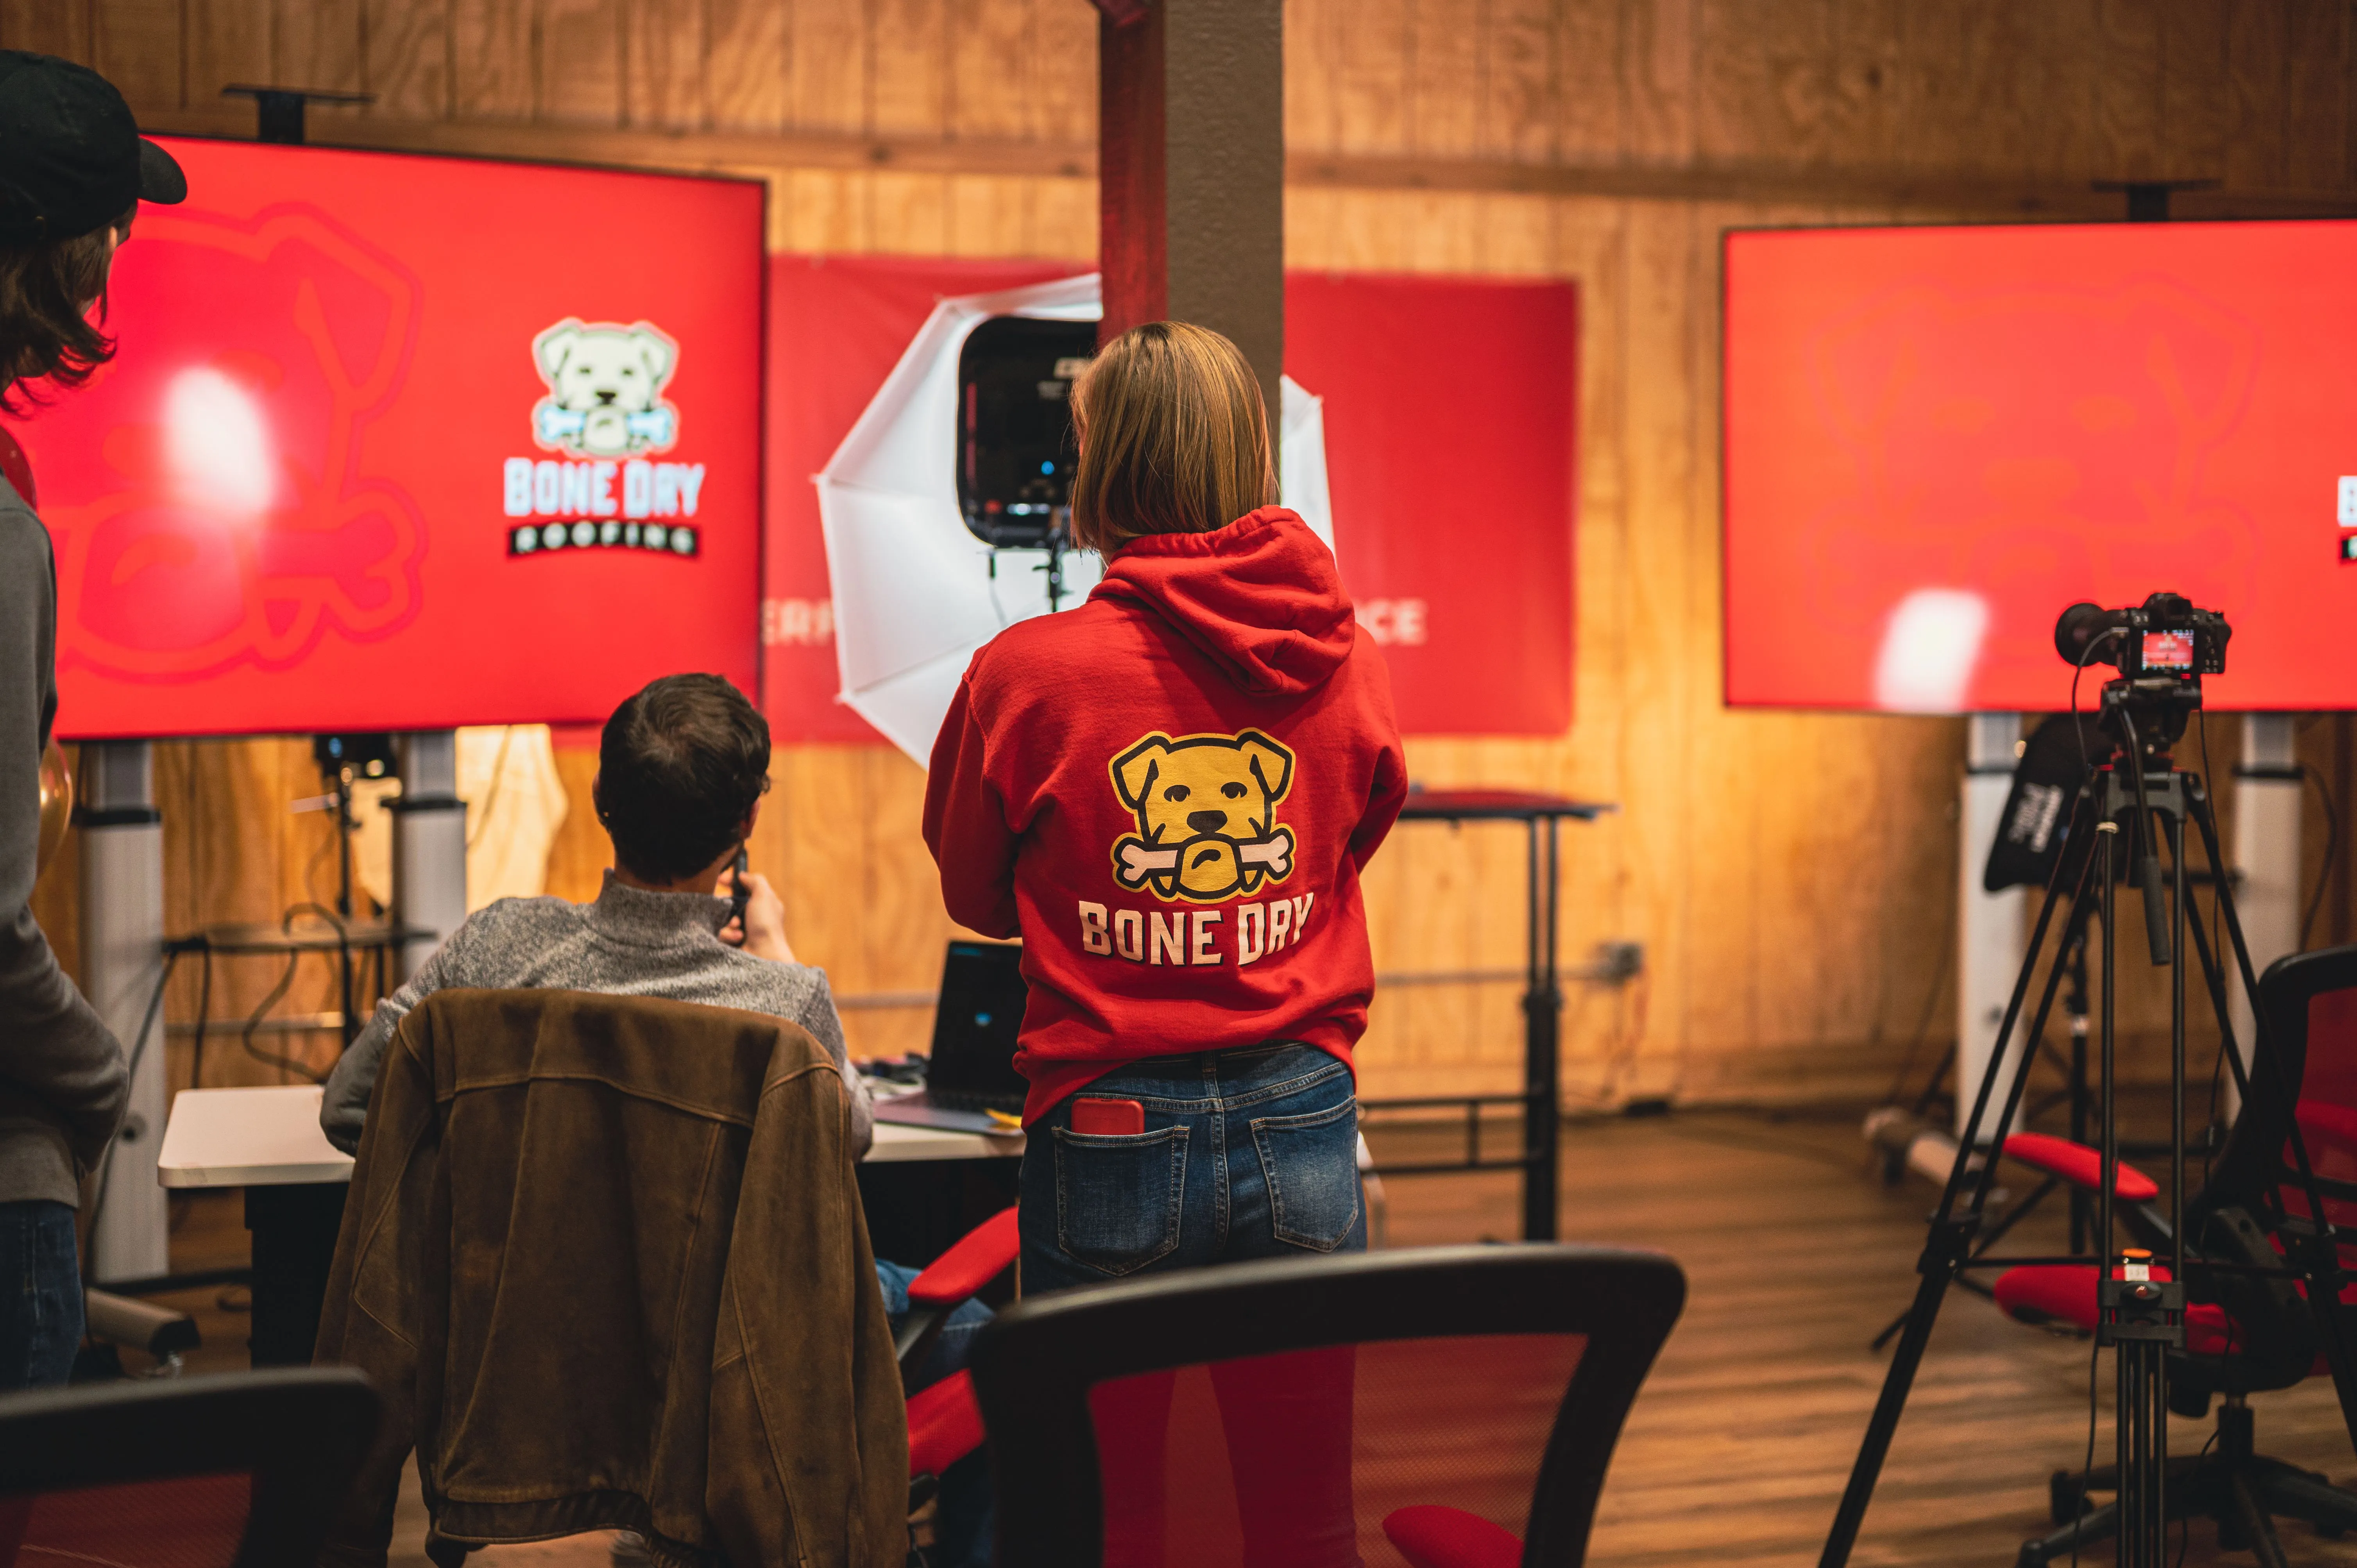 Individual in red hoodie watching over a video recording setup with multiple monitors and a camera on a tripod in an indoor setting.